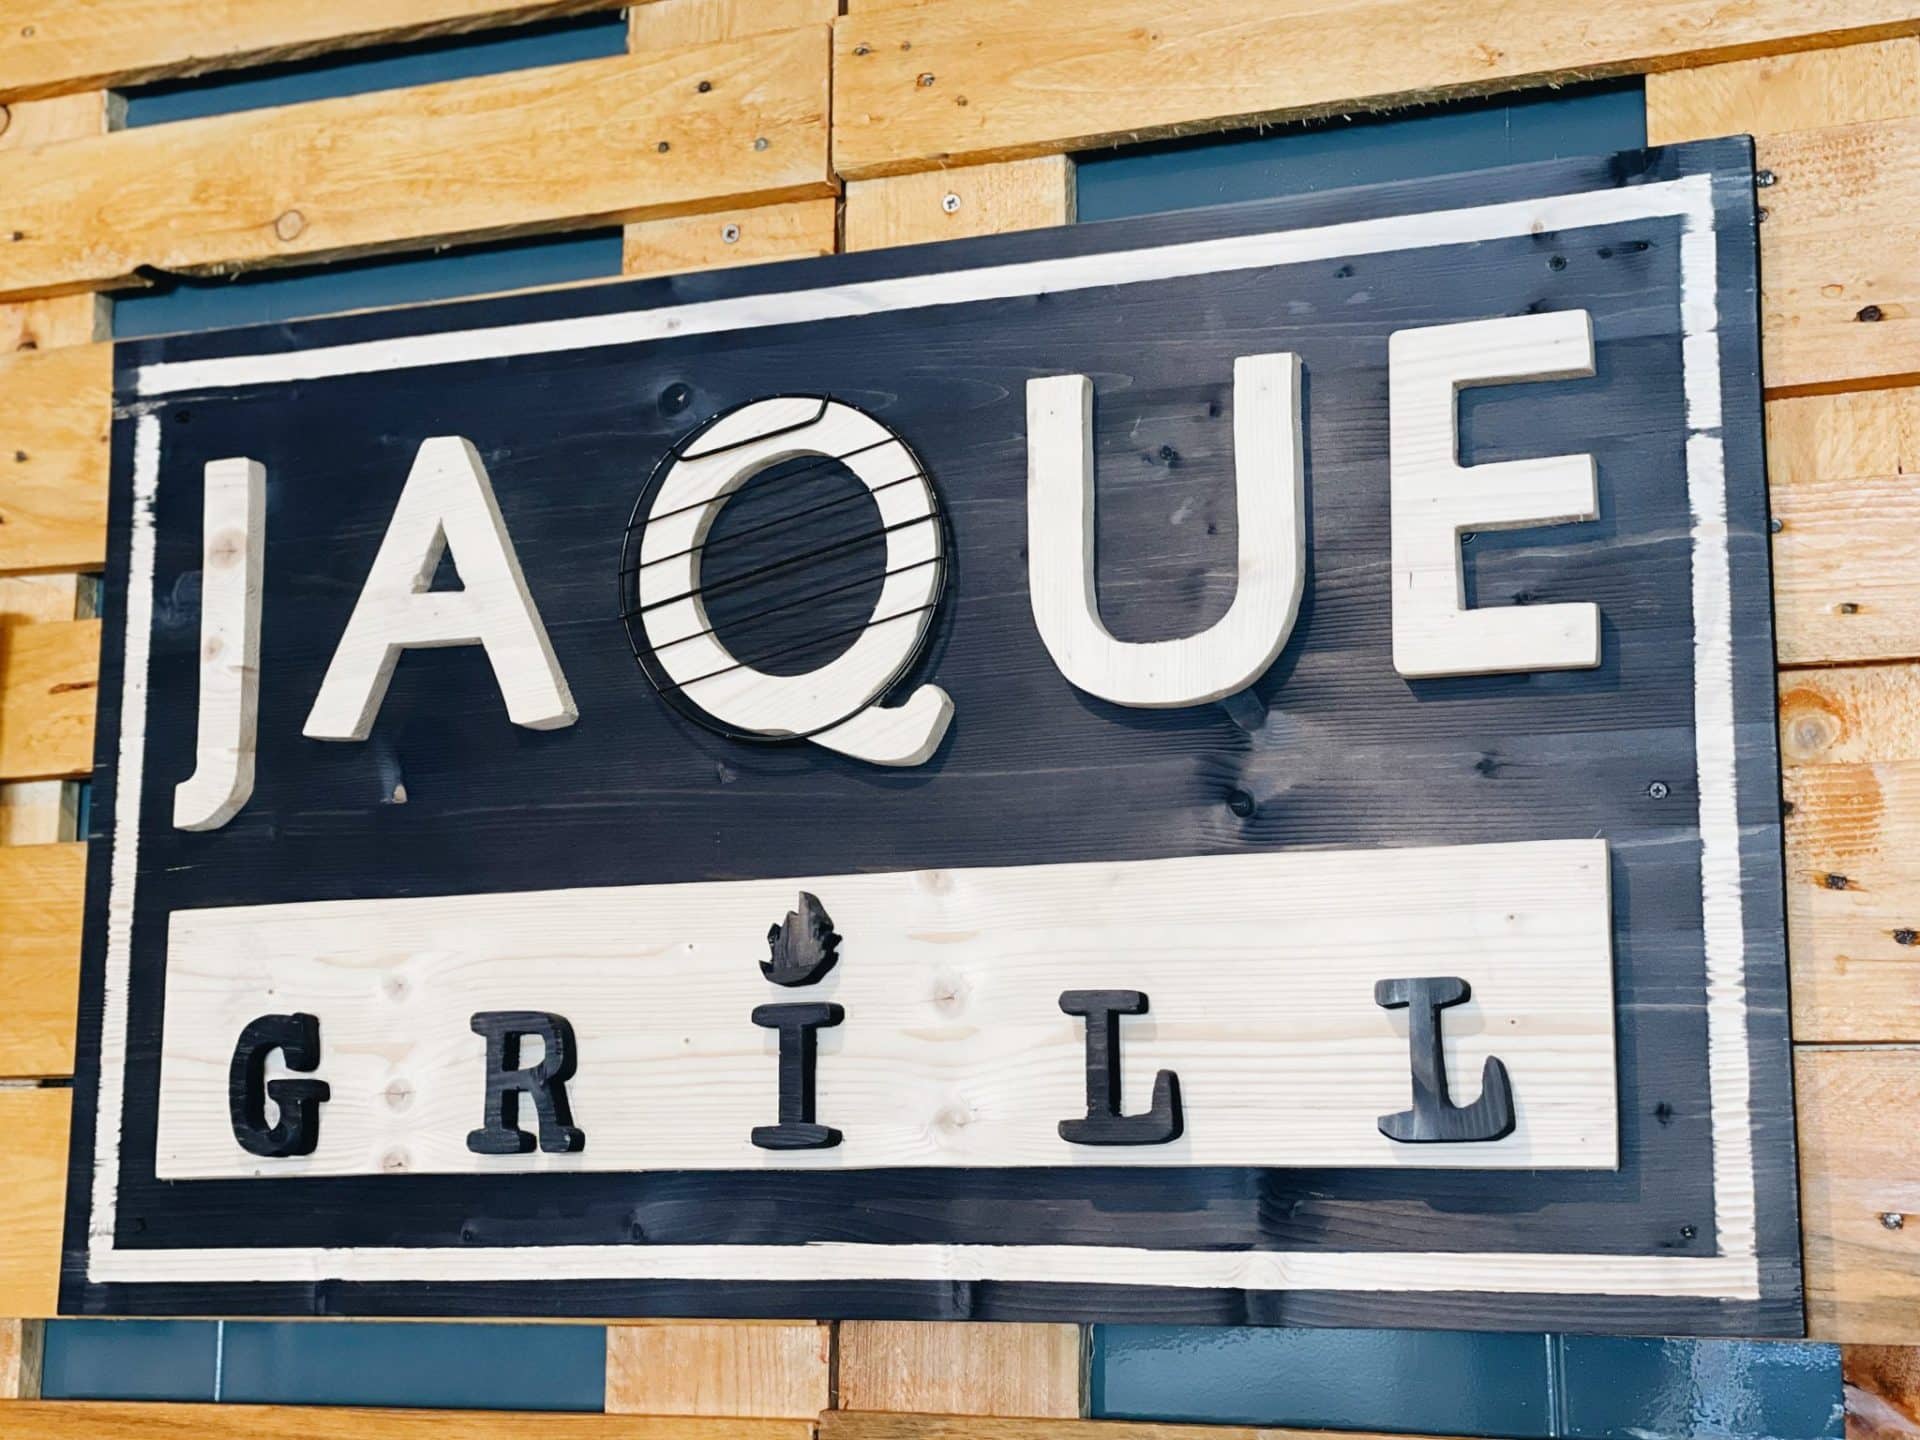 Jaque Grill